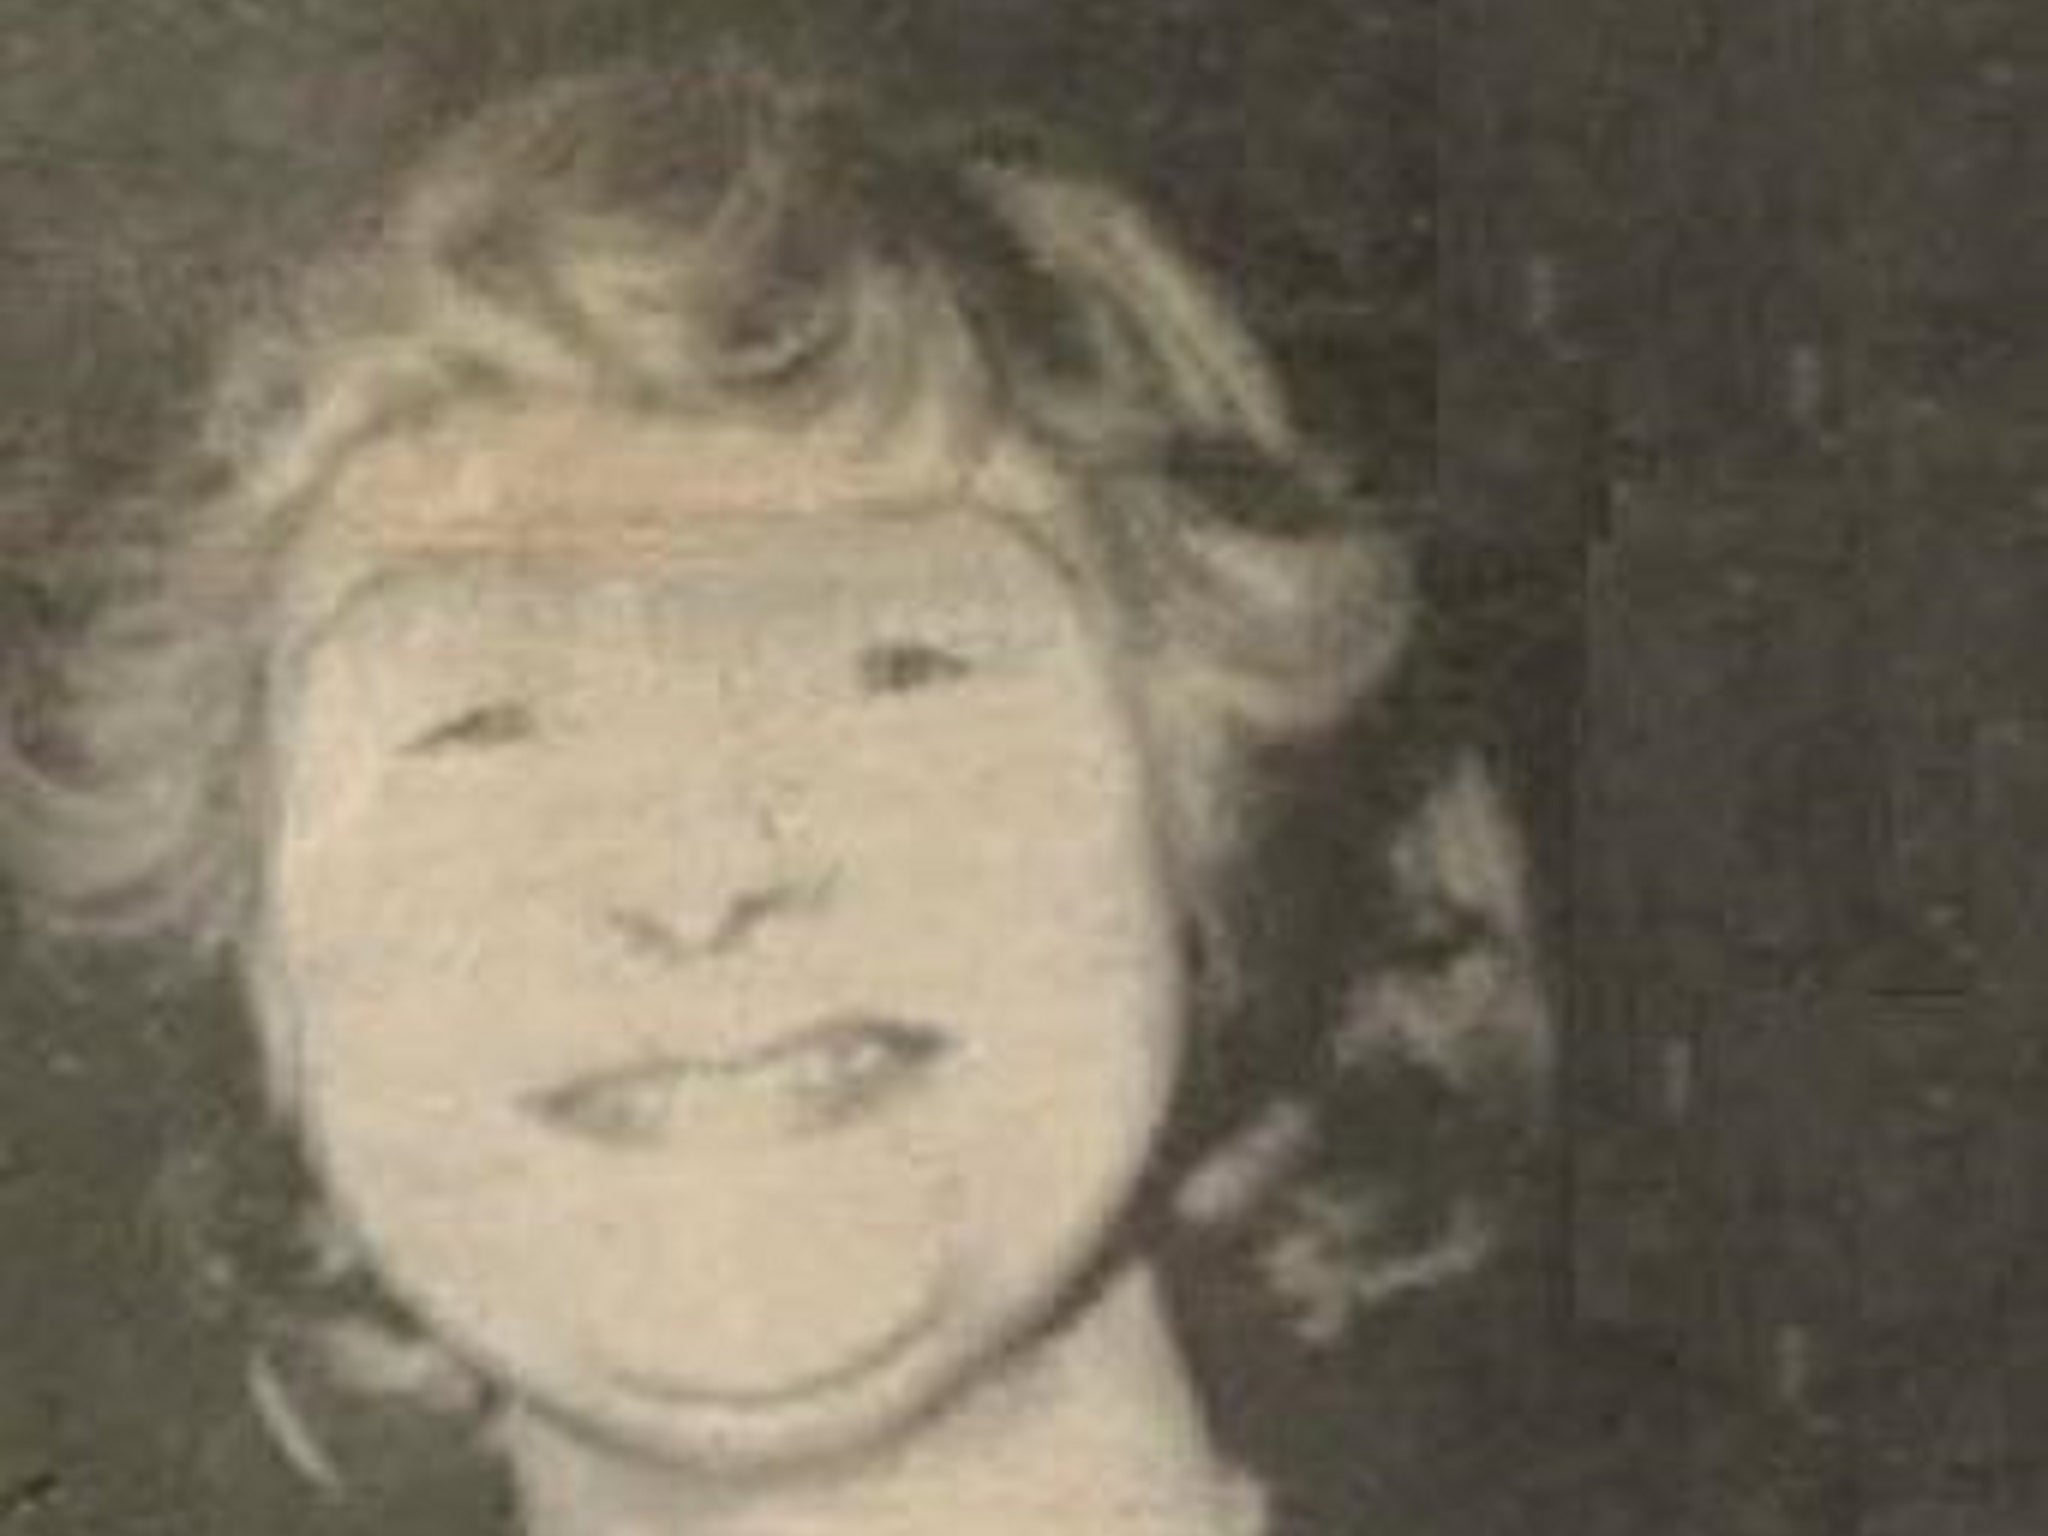 Two people have been arrested on suspicion of murder in connection with the death of Carol Morgan, 36, in Bedfordshire in 1981.